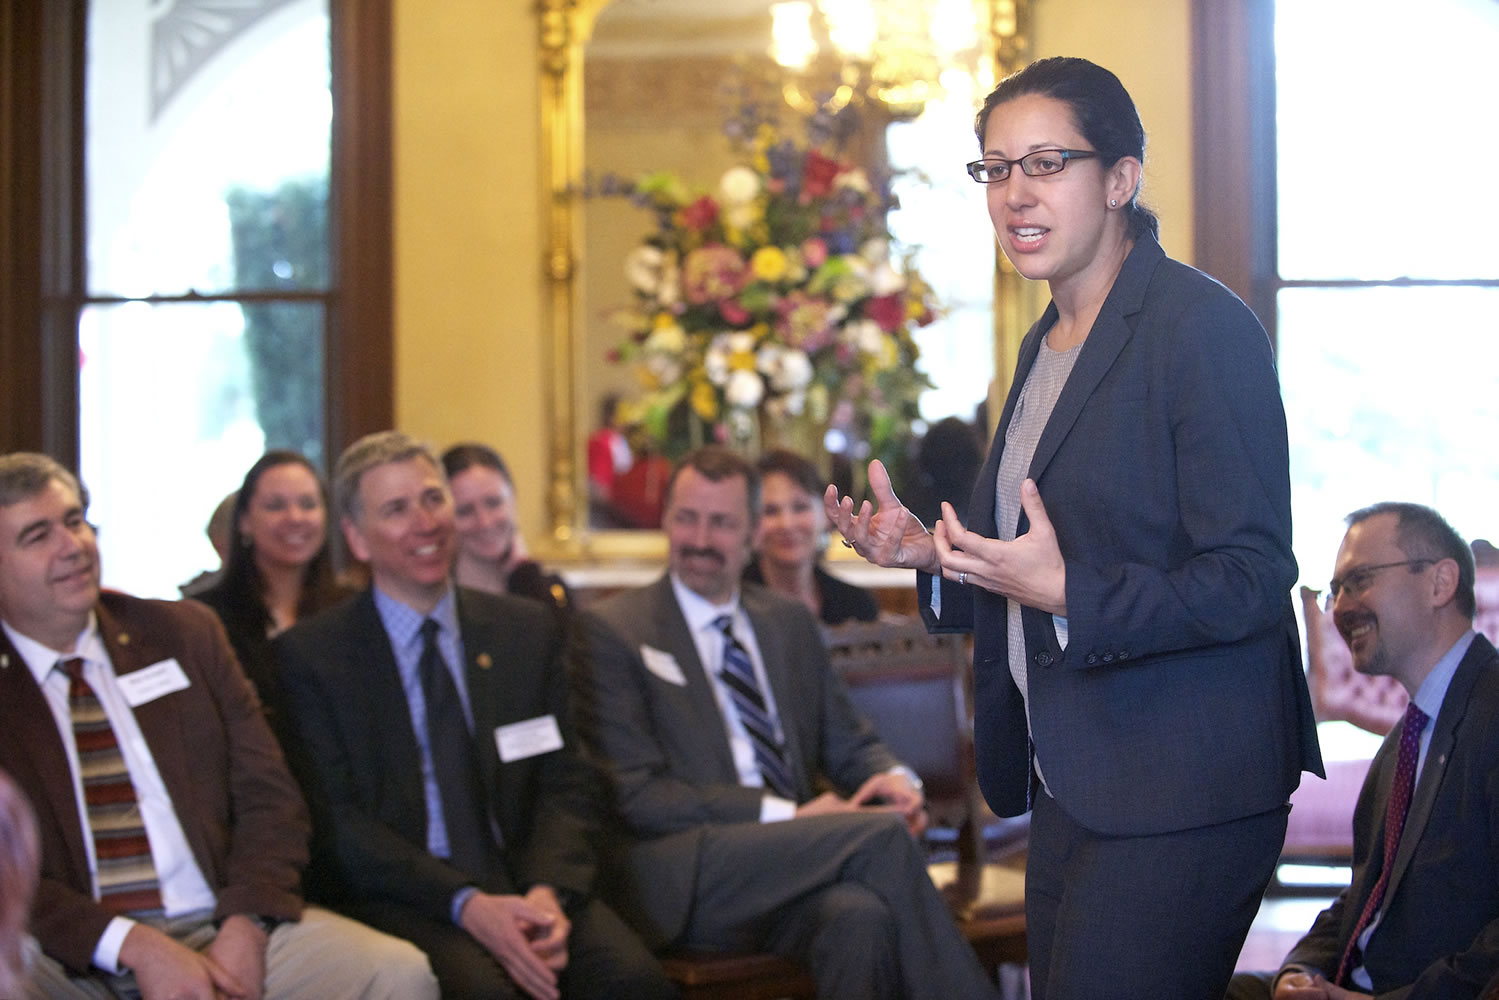 Priya Guha, British consul general in San Francisco, meets with local leaders Tuesday at the Marshall House.